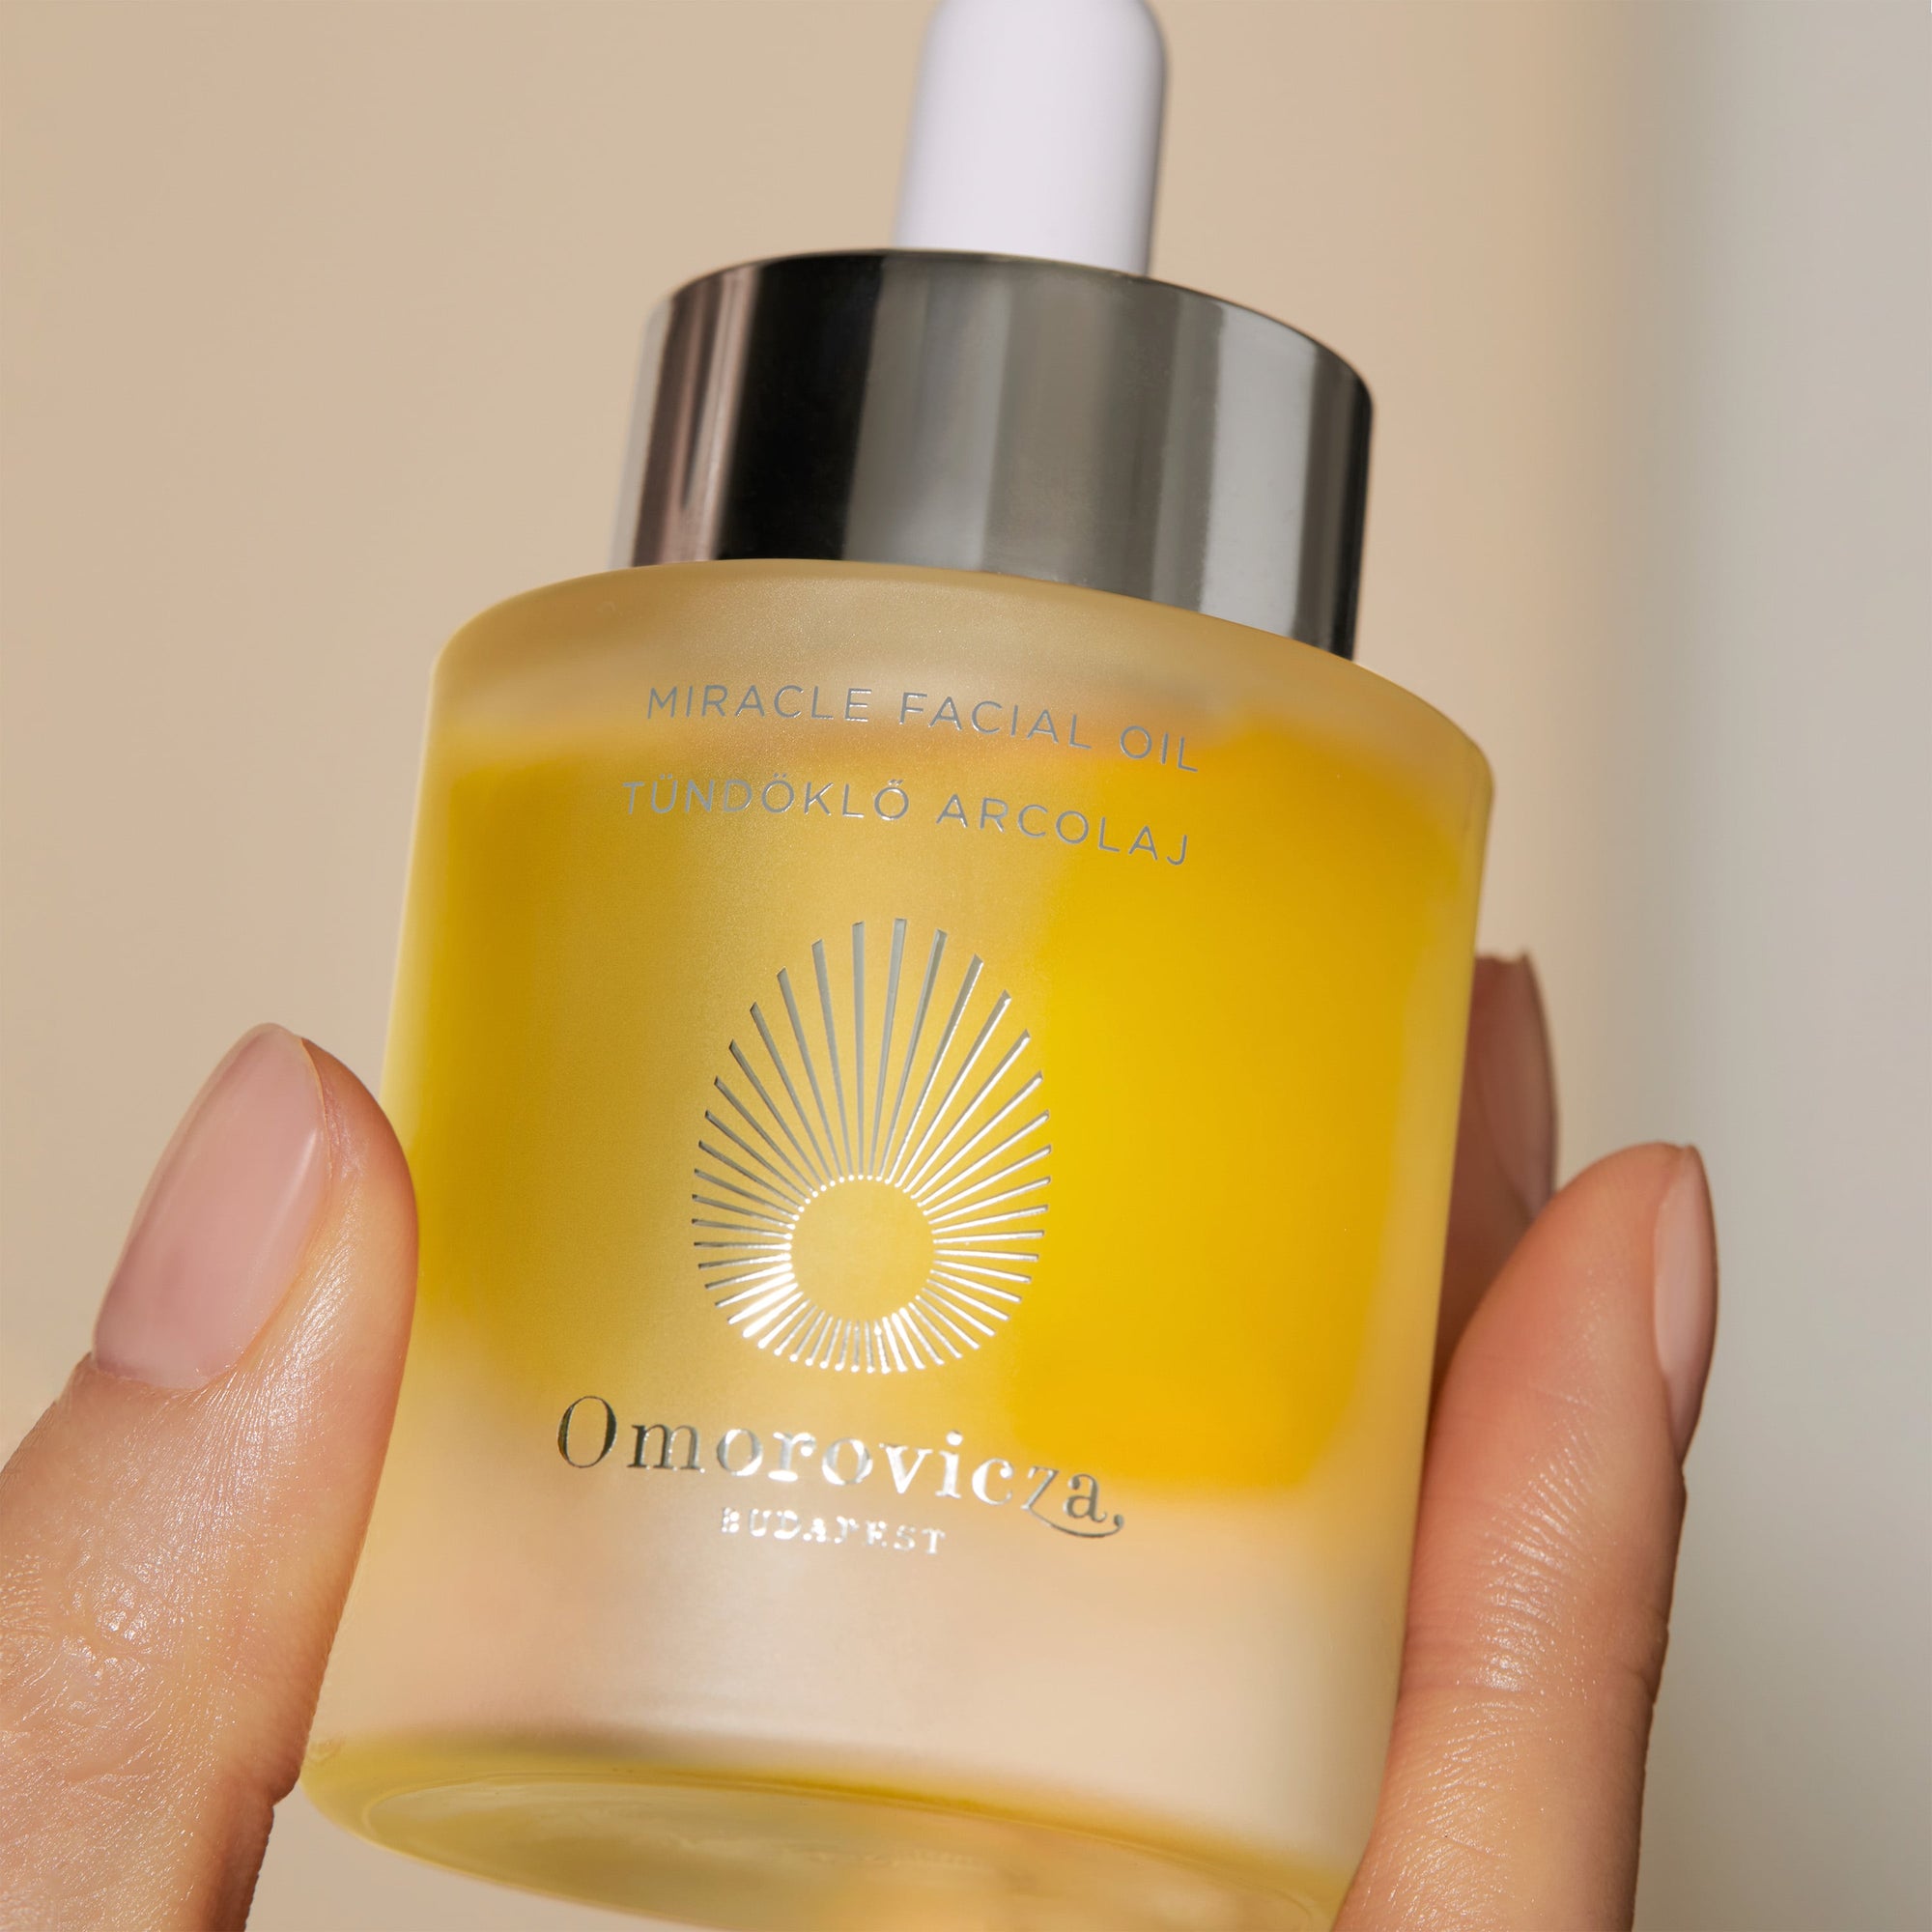 Hand holding a bottle of Omorovicza Miracle Facial Oil.